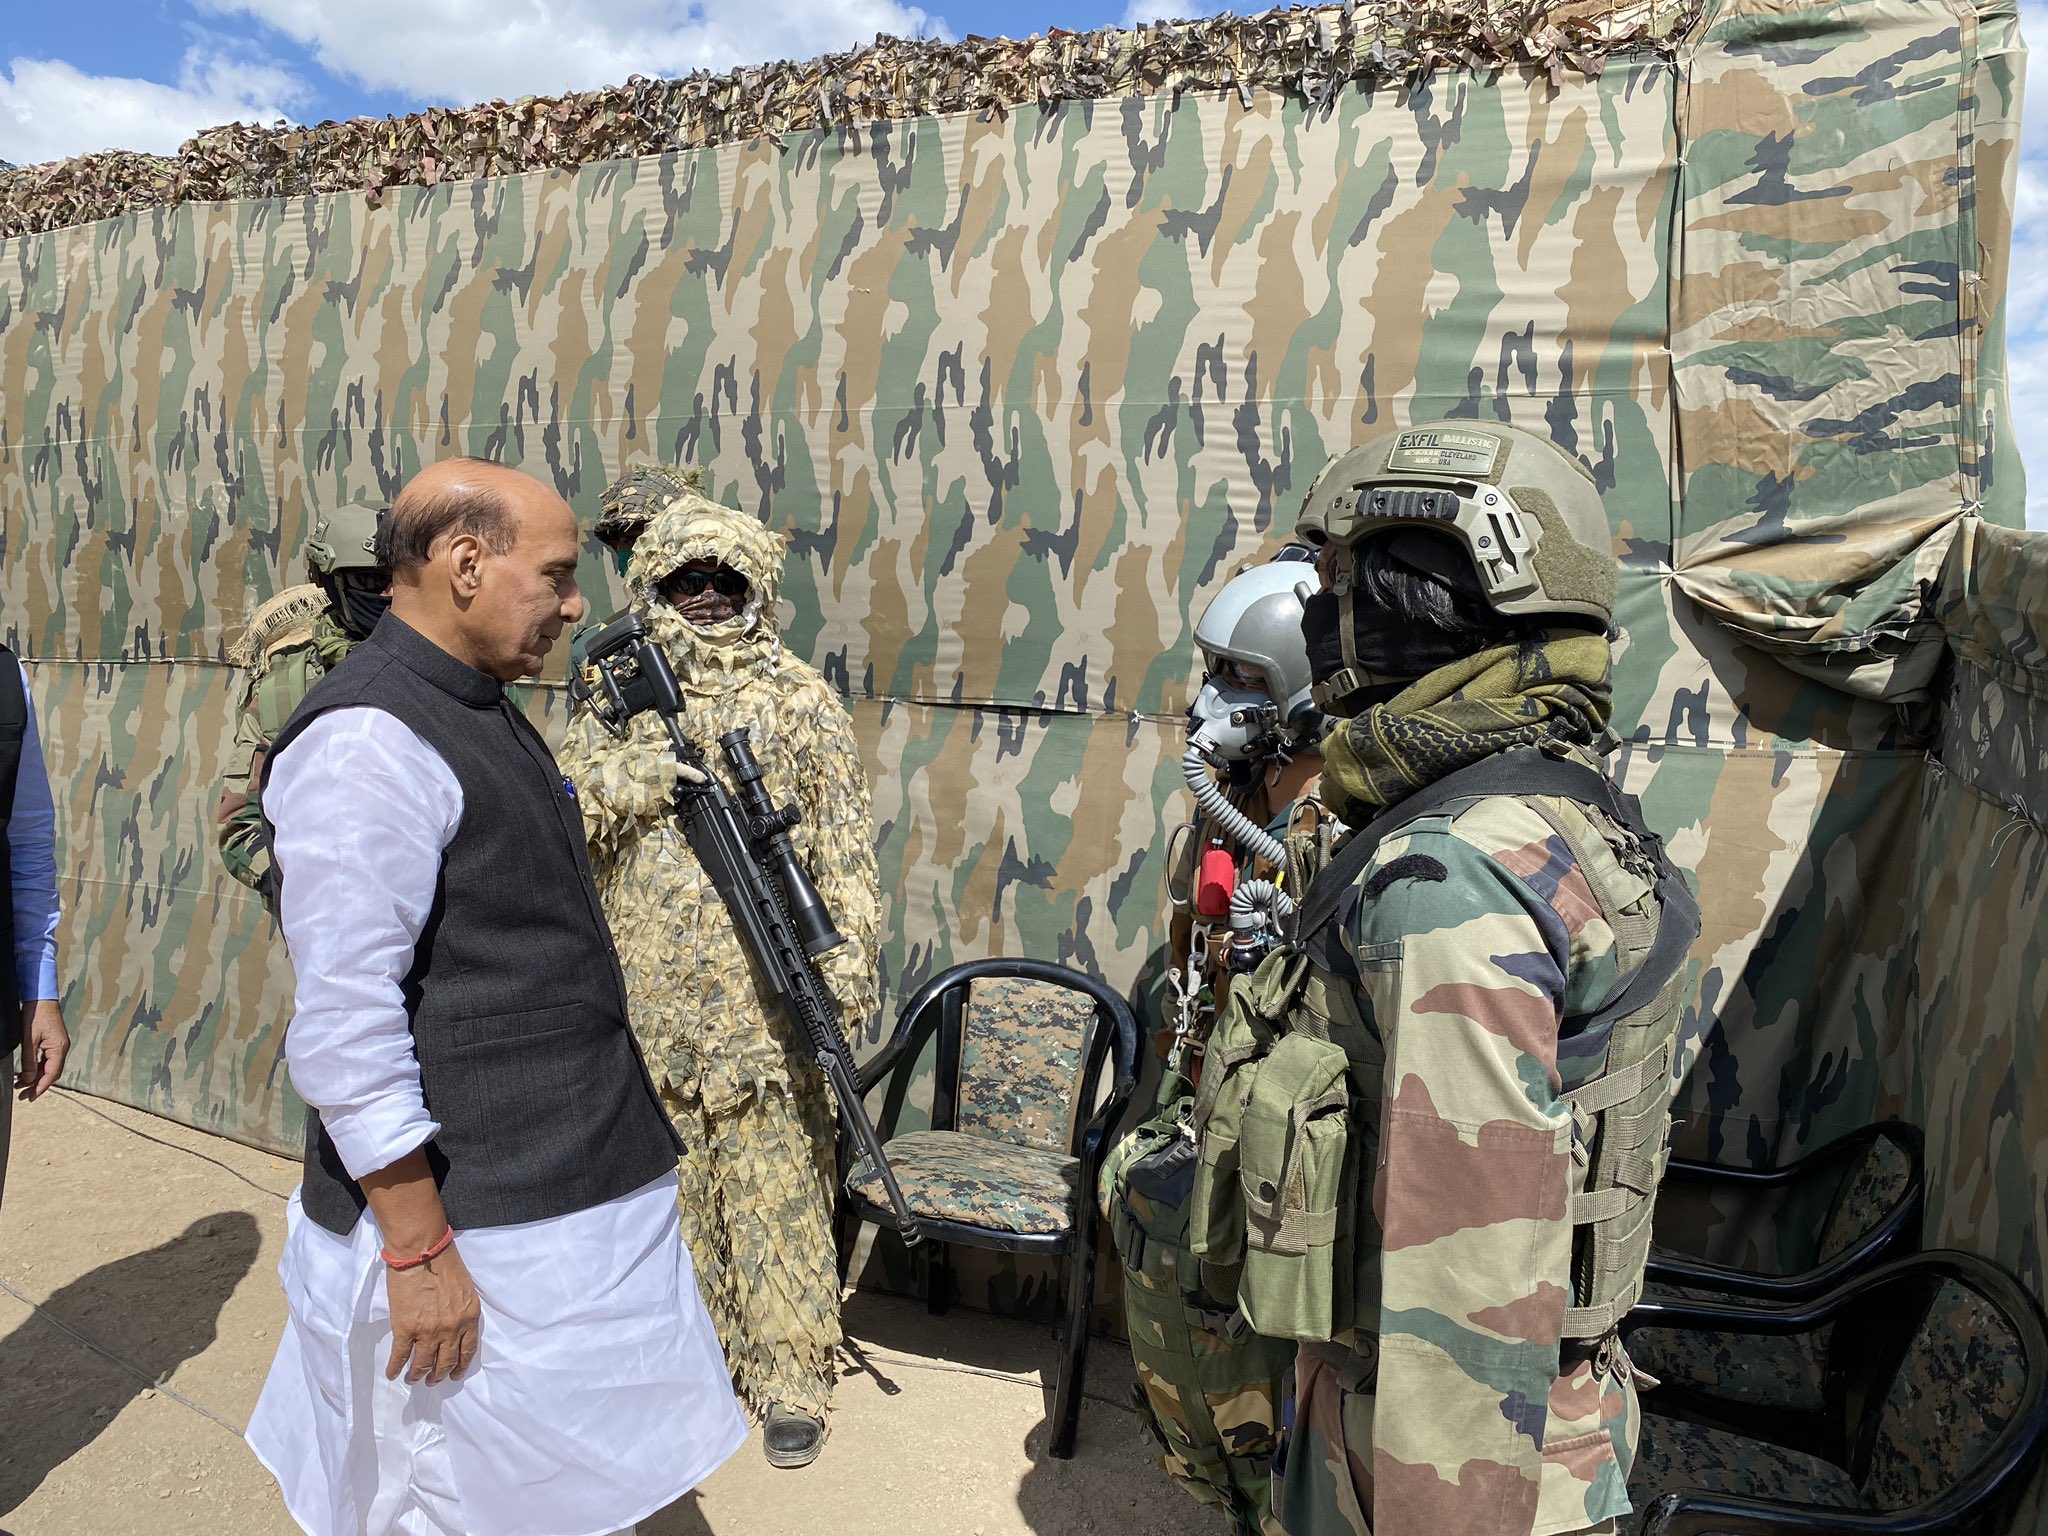 Rajnath Singh with the troops who participated in the para dropping and other military exercise at Stakna